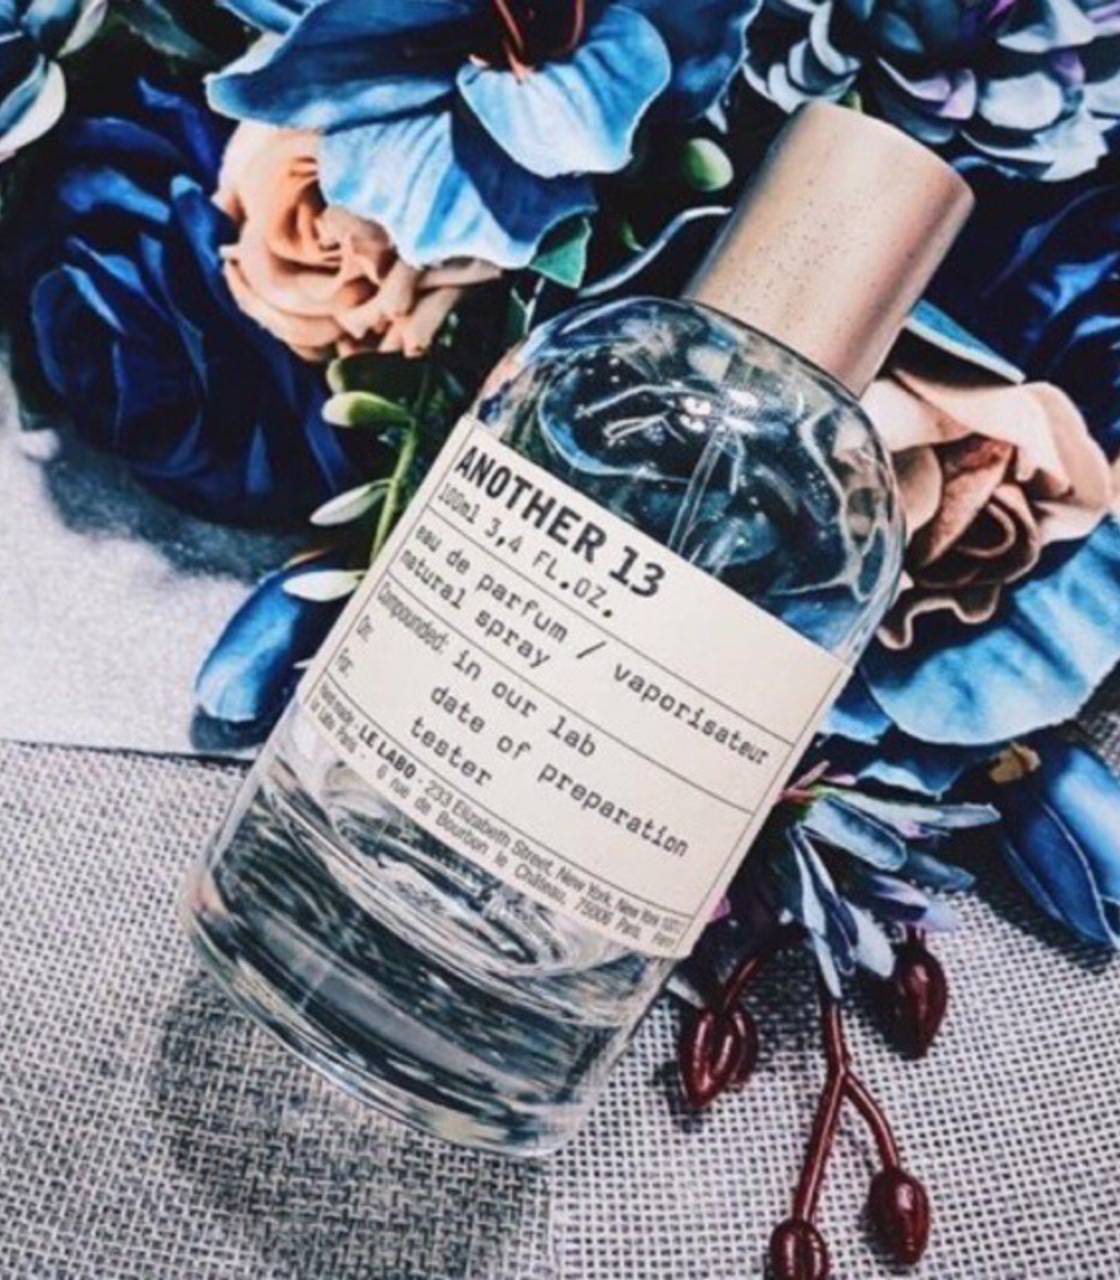 Le Labo Another 13 EDP